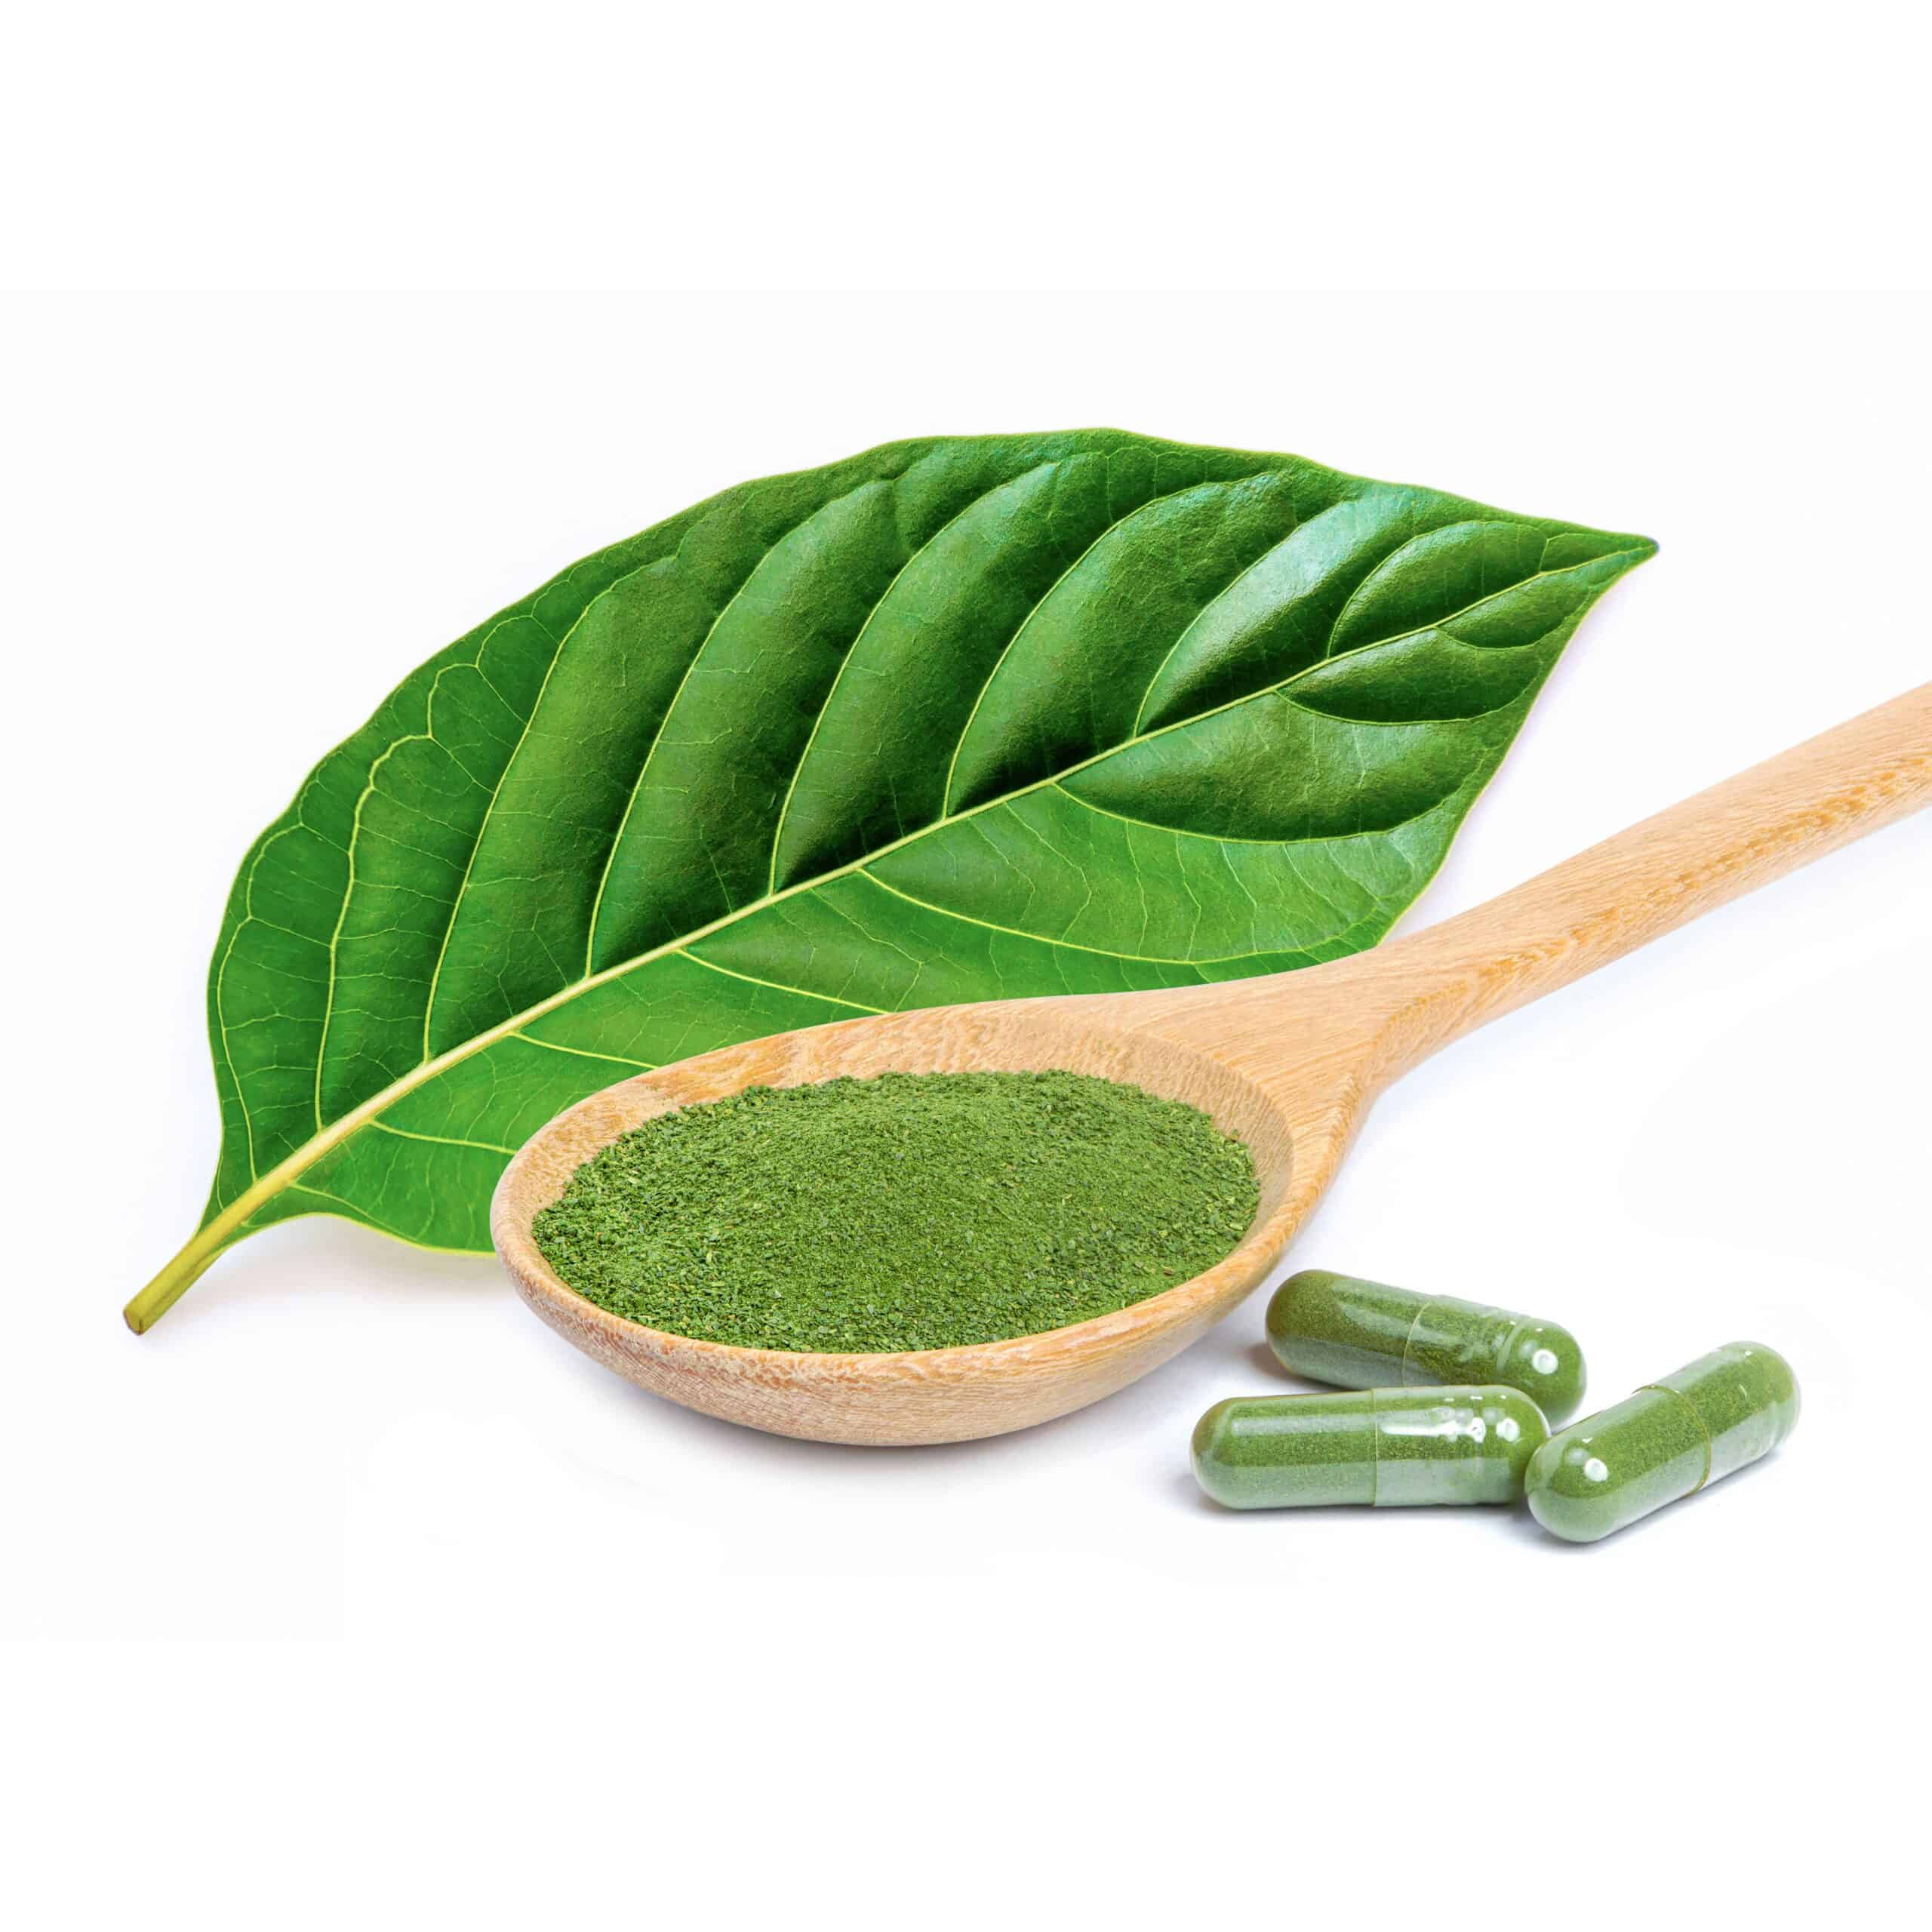 Kratom Powder Extract: Buying and User Guide